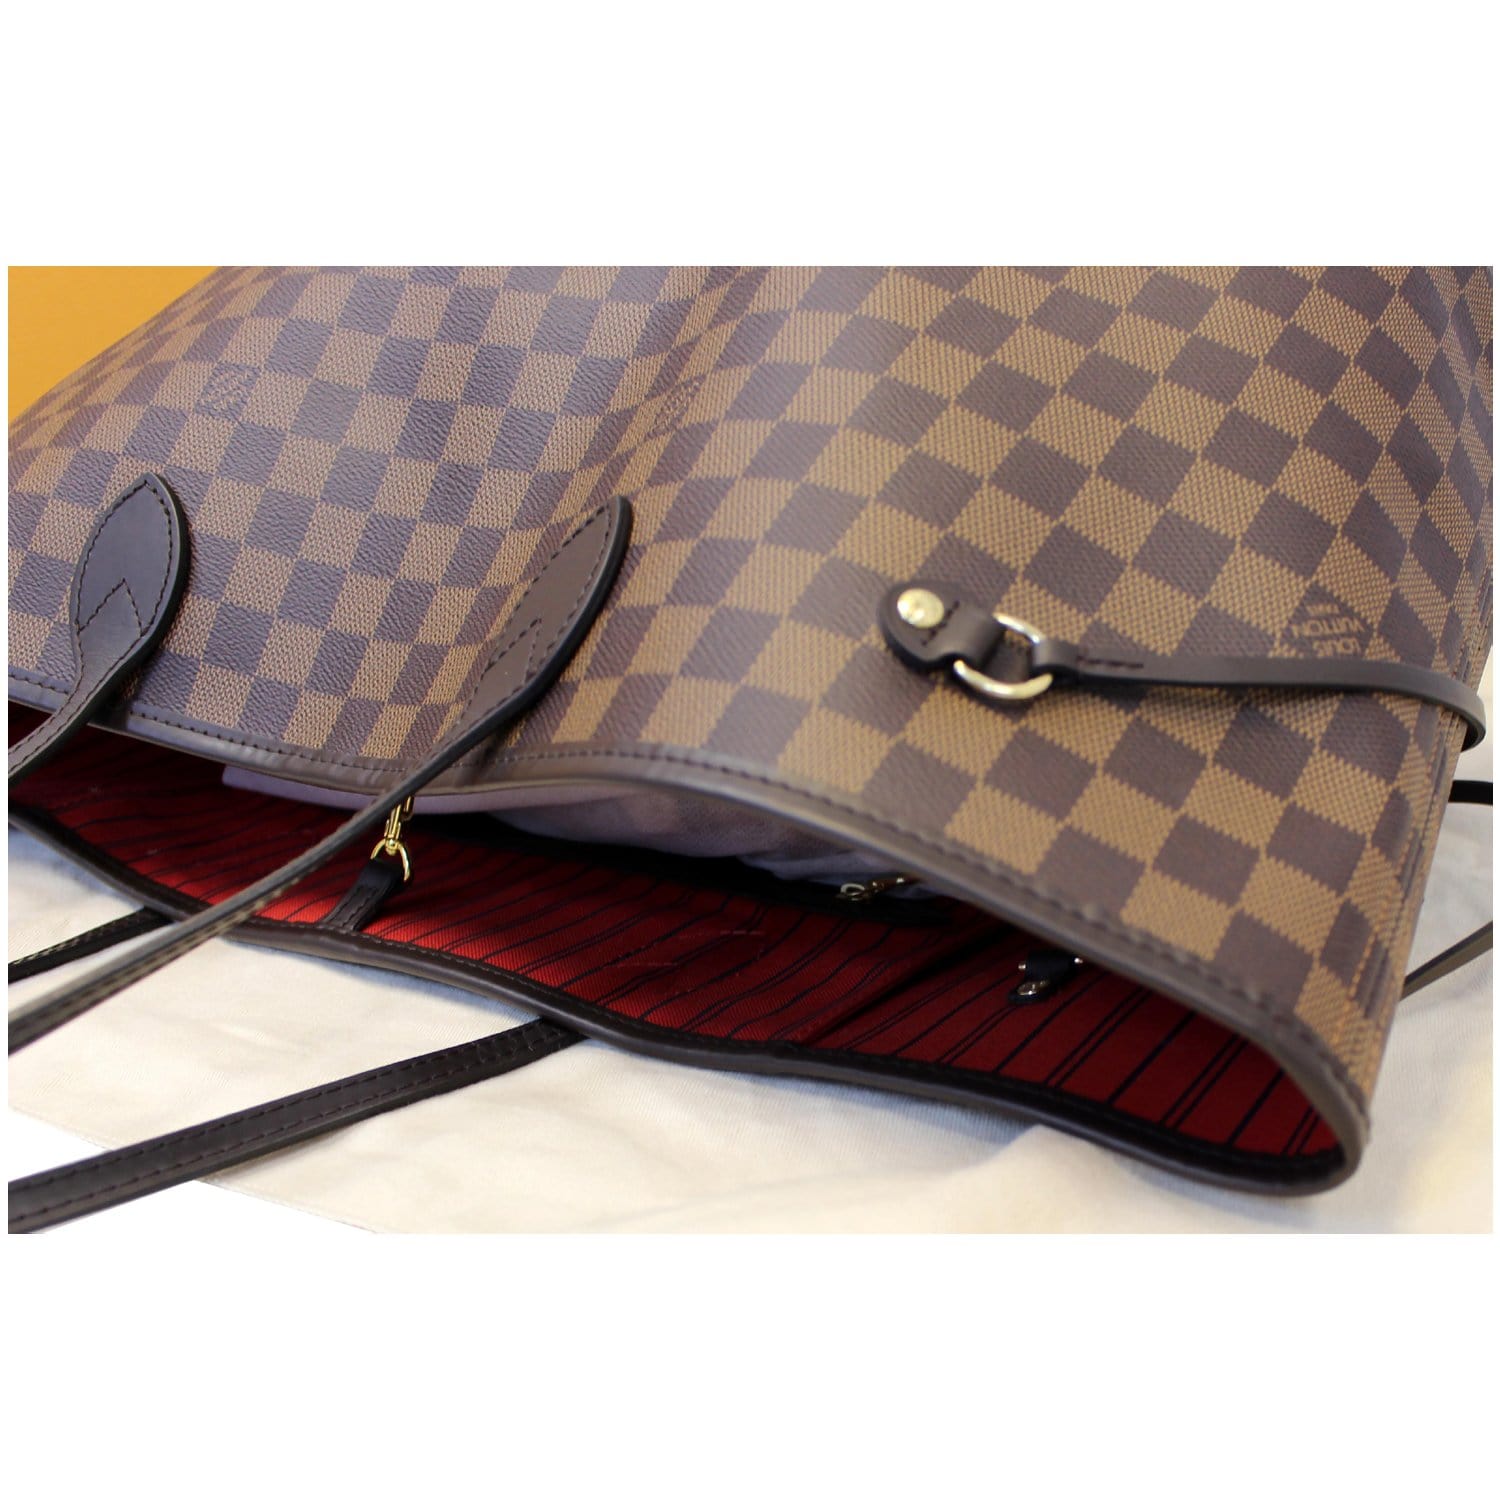 Pin by Fashion Americano on CHANEL  Louis vuitton bag neverfull, Bags,  Louis vuitton neverfull